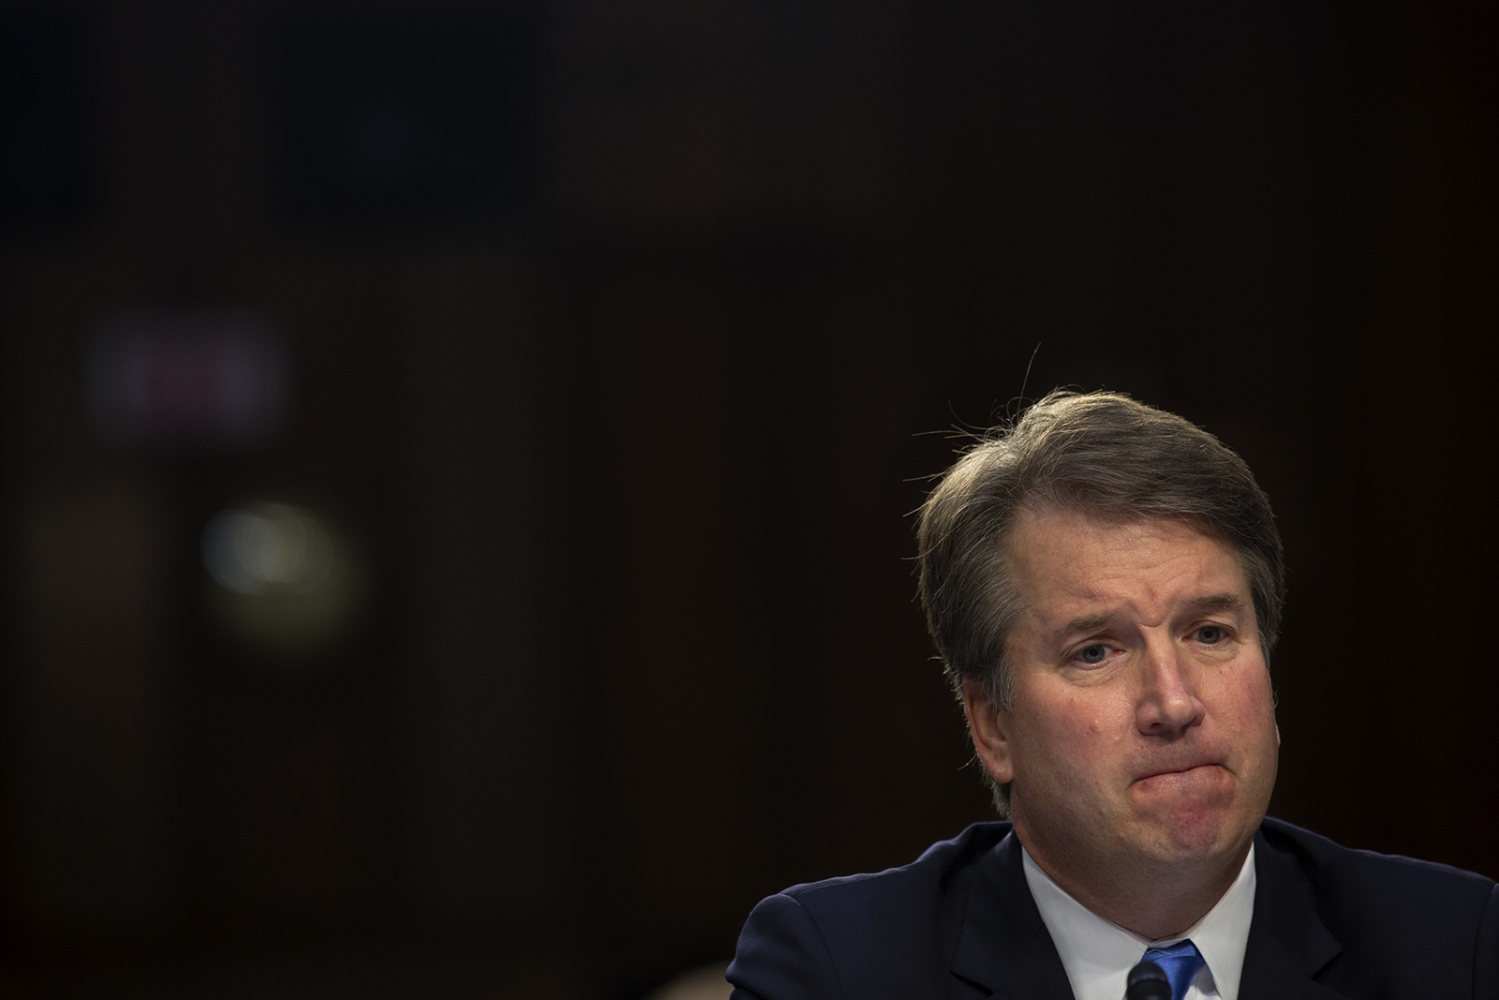 Judge Brett Kavanaugh during hi... to be a Supreme Court Justice.